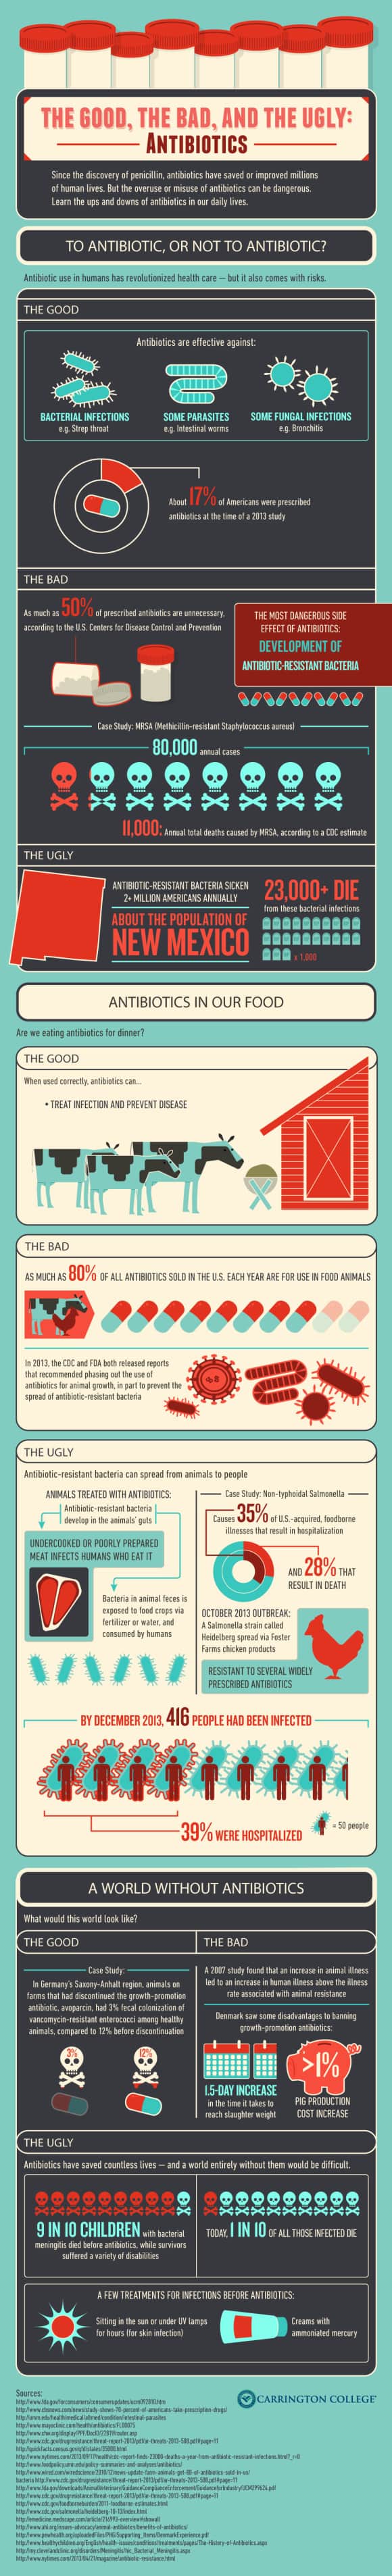 The Good, The Bad, The Ugly - Antibiotics